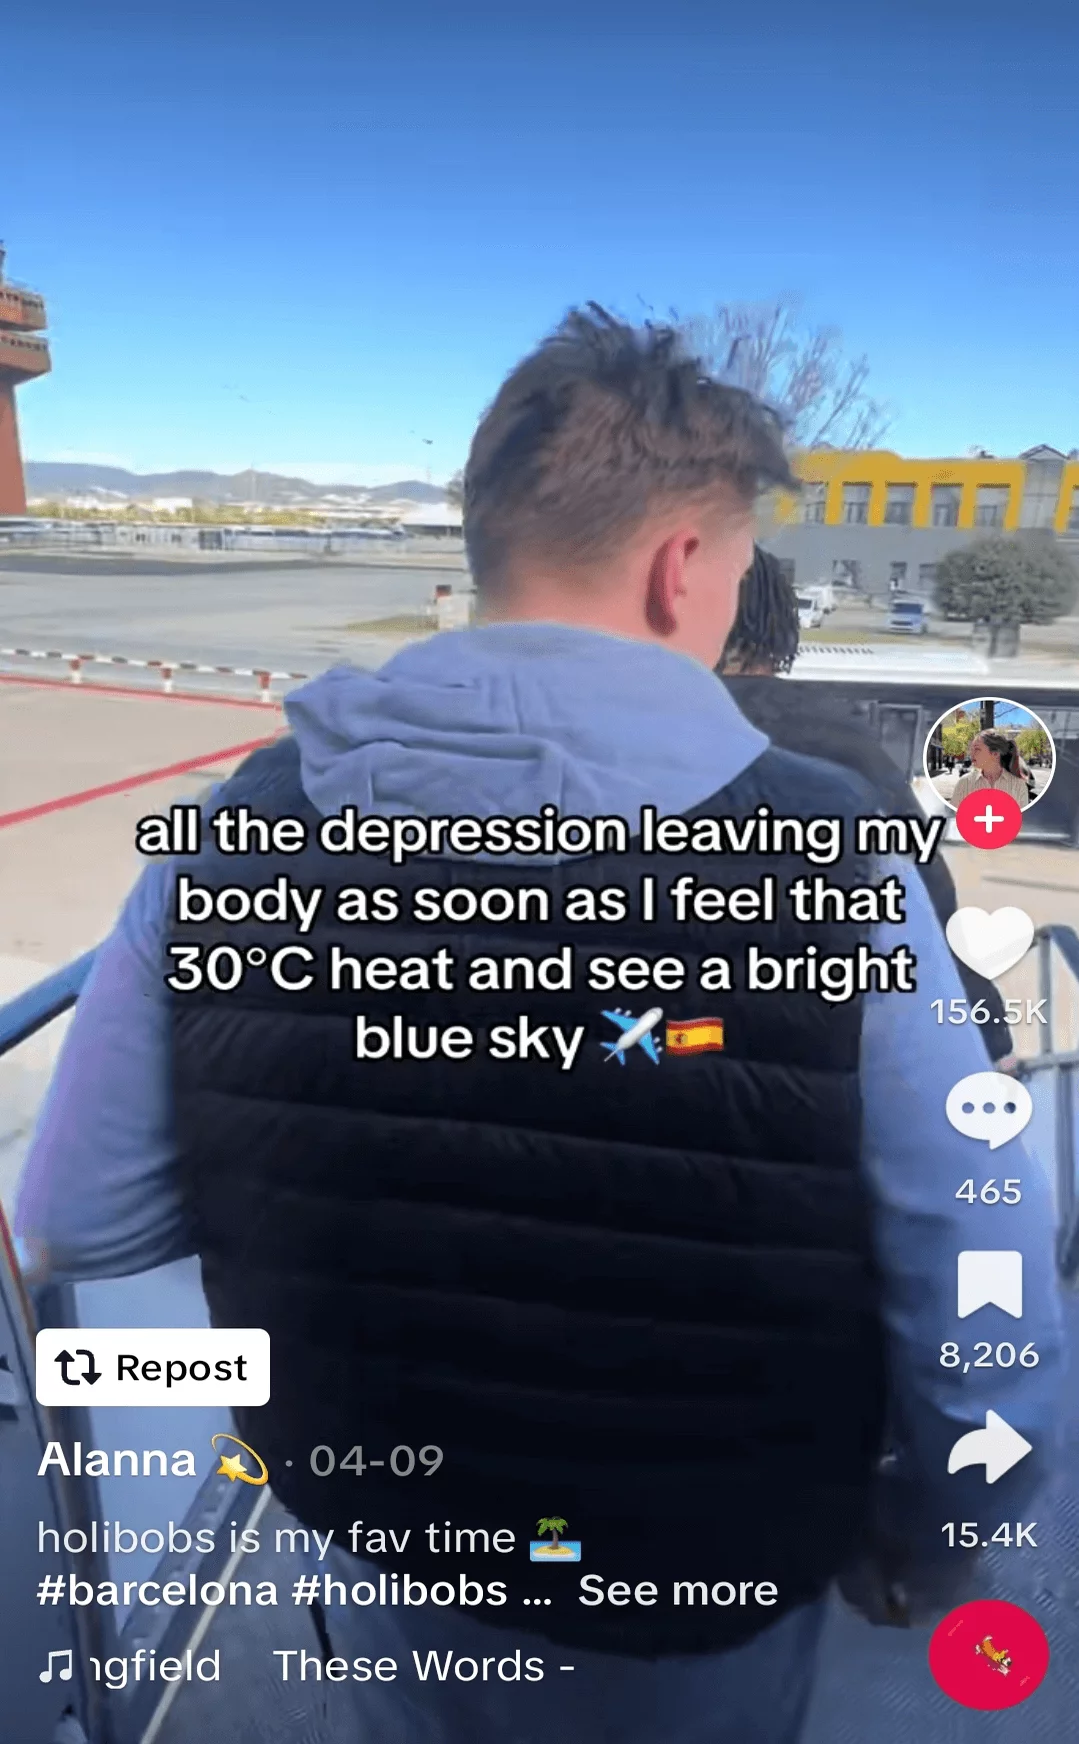 Man viewed from behind, looking out over a sunny airport runway, featured in a social media post expressing relief and enjoyment of warm weather.